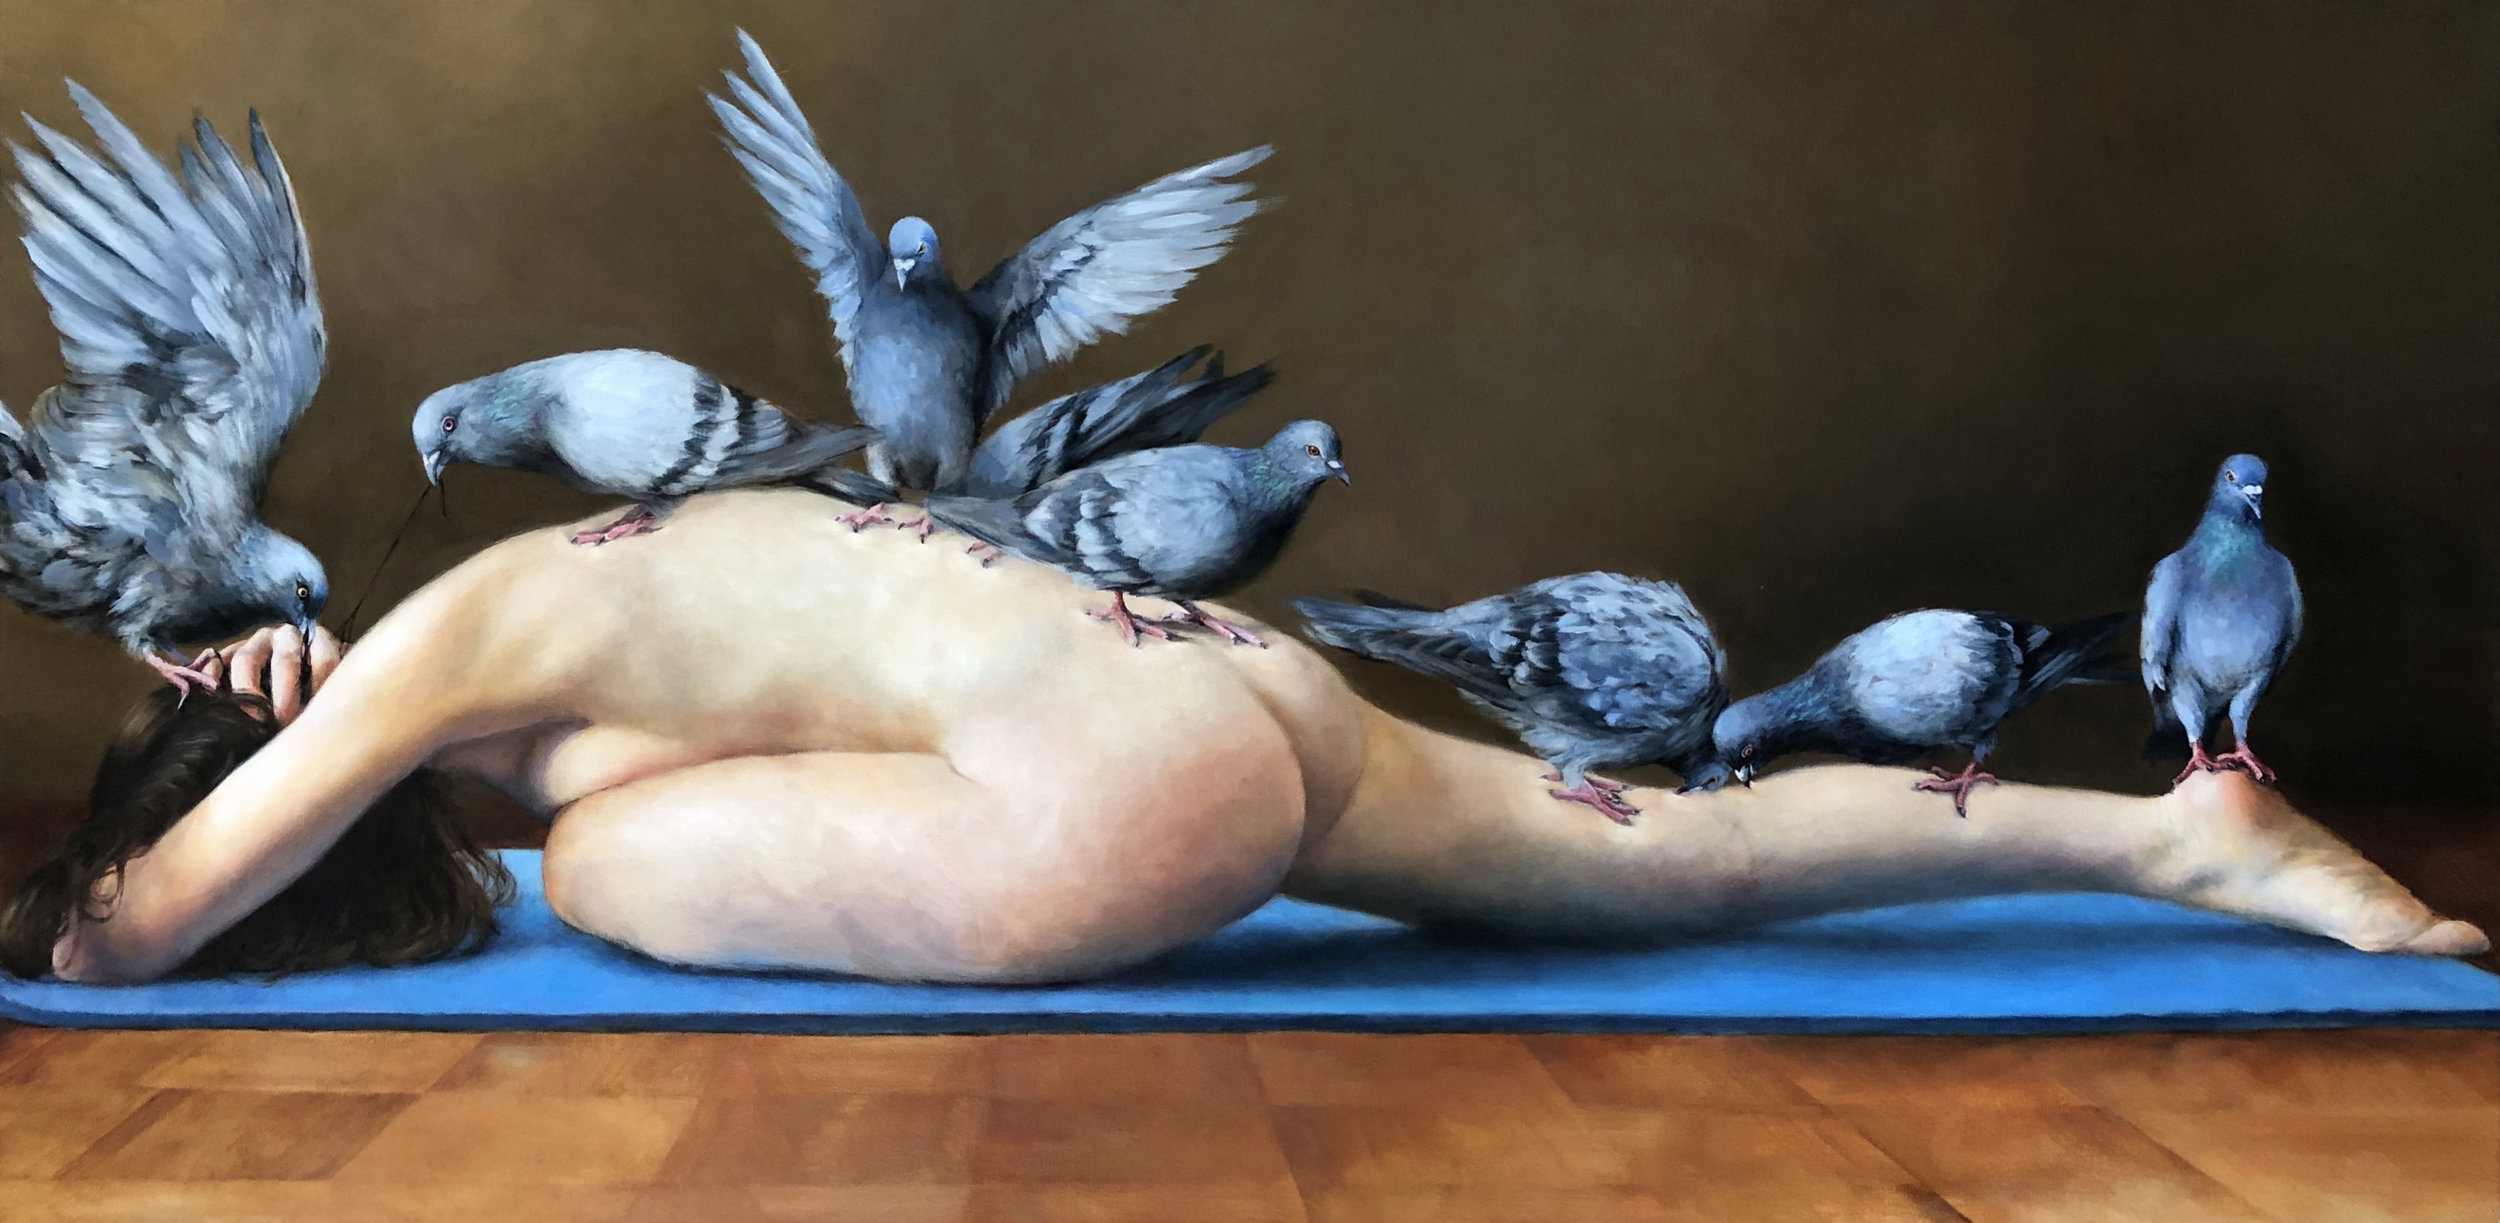   PIGEON POSE   oil on canvas 24” x 48” 2016 